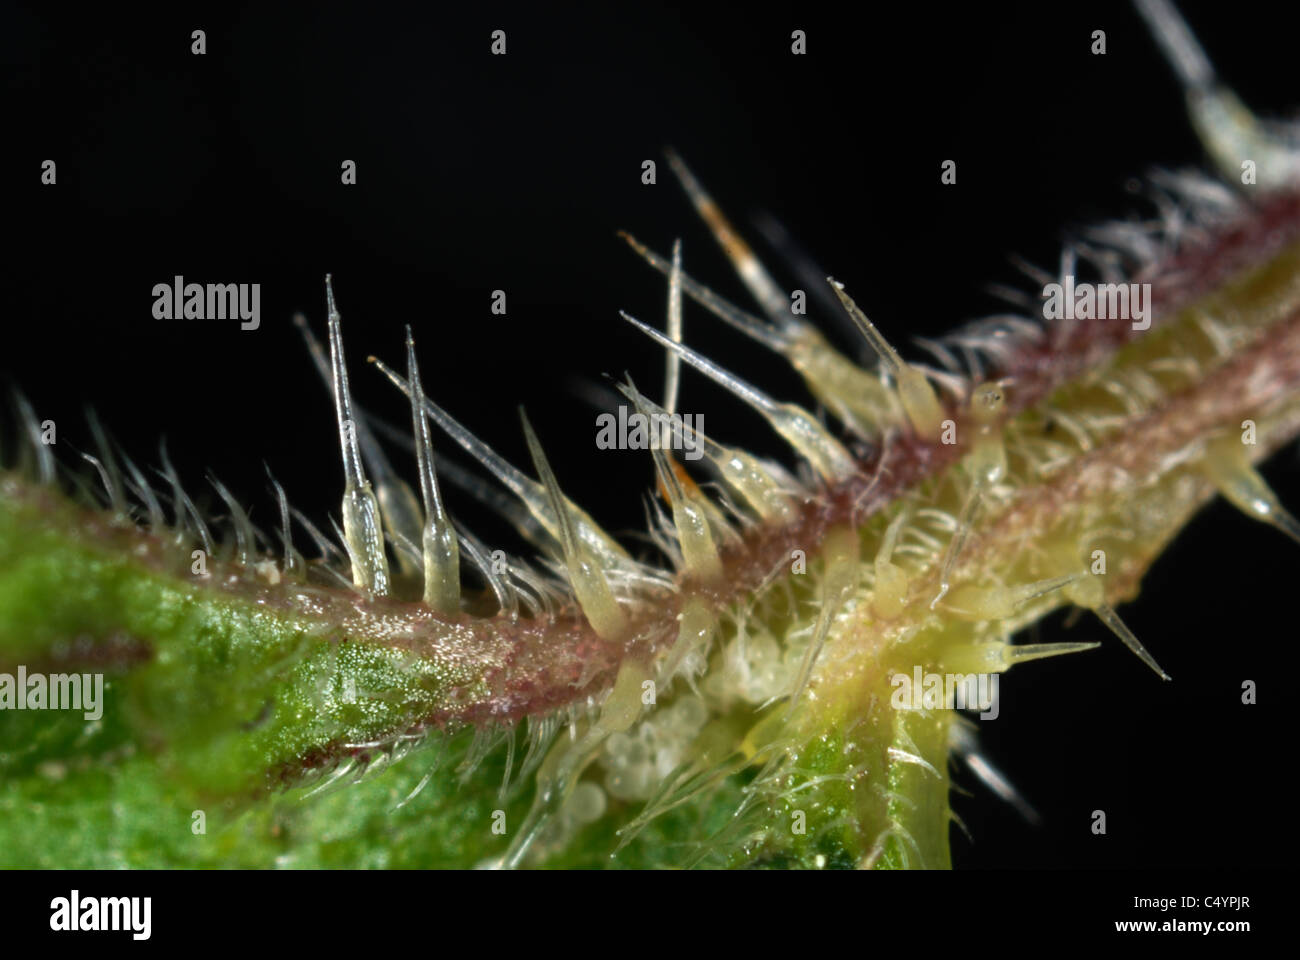 Photomicrograph of stinging hairs of a stinging nettle (Urtica dioica) Stock Photo